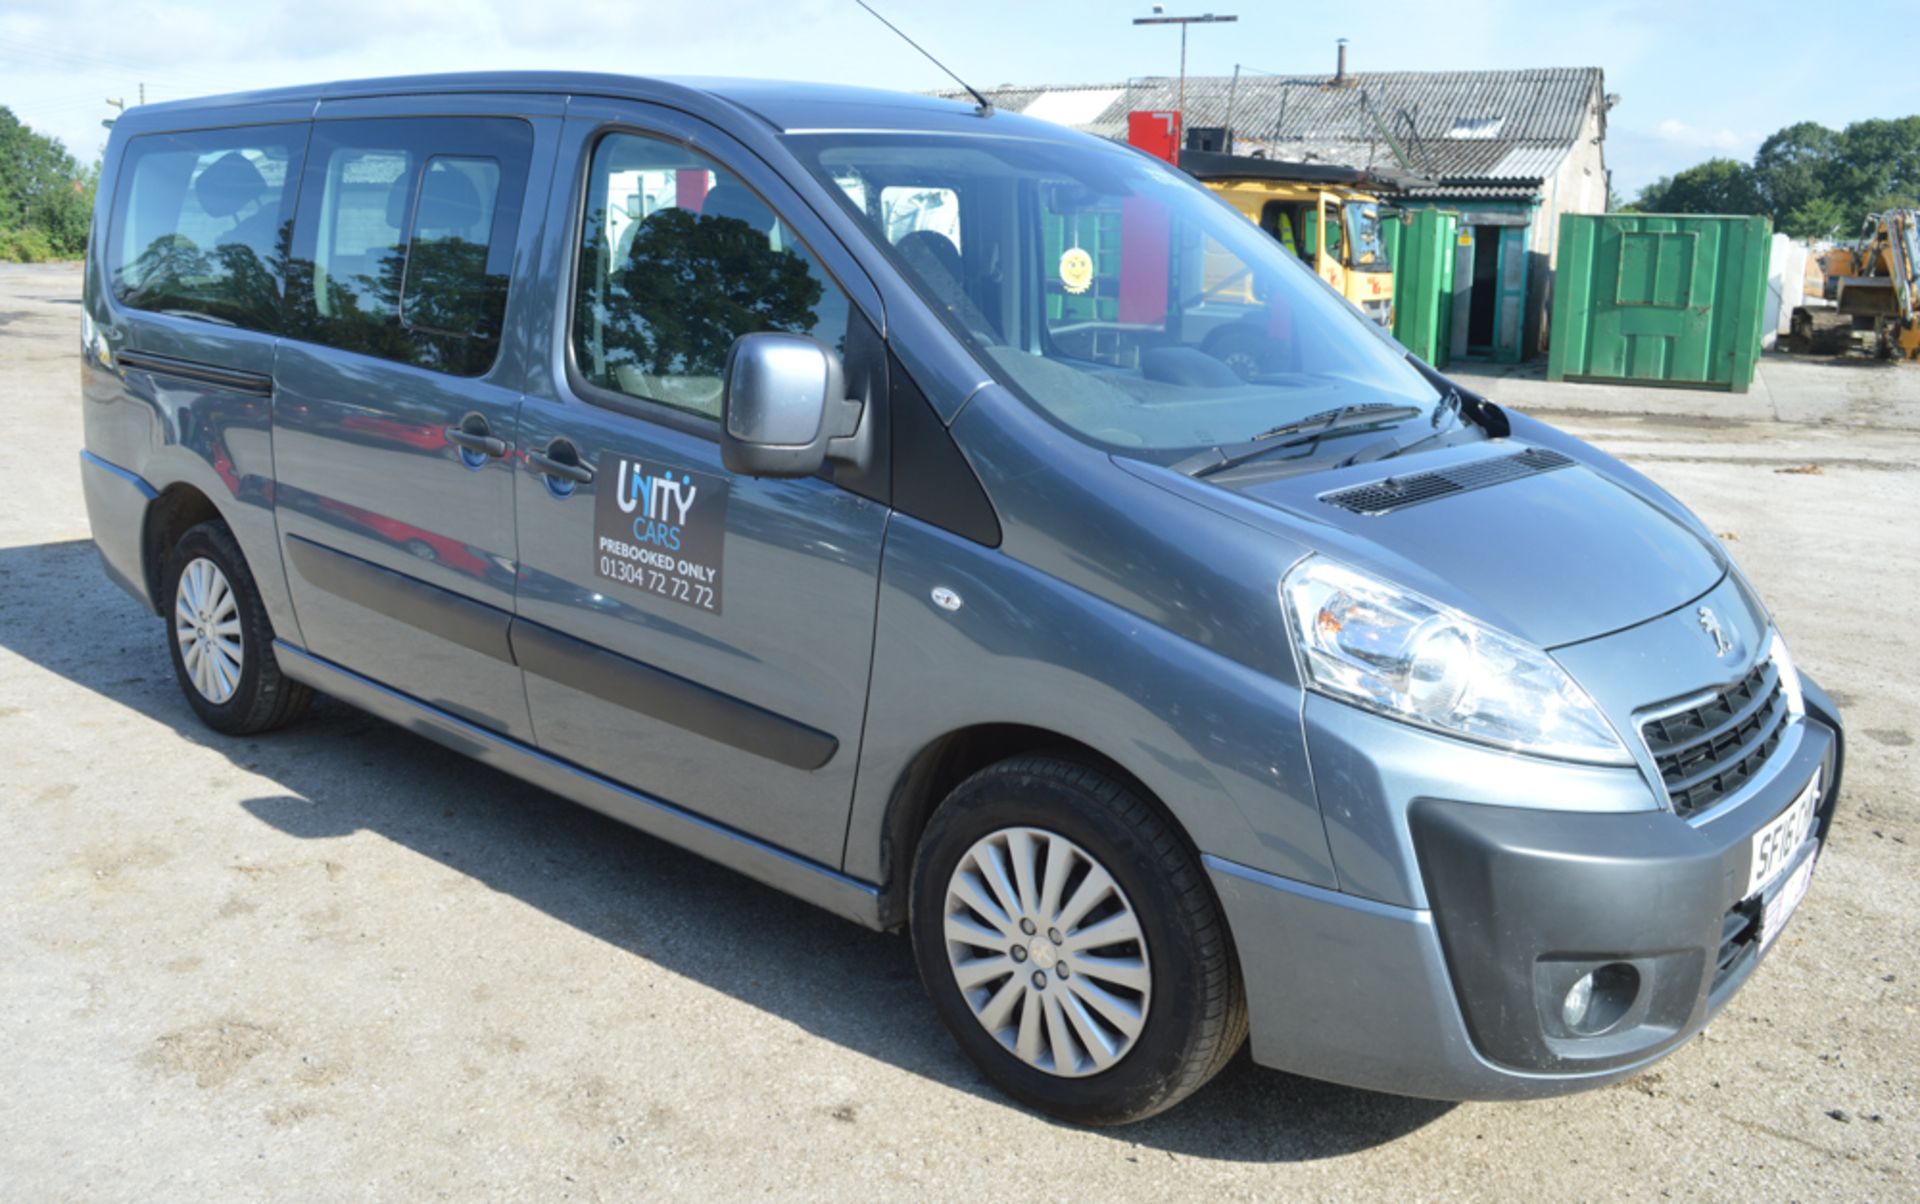 Peugeot Expert Tepee Independence SE Plus 6 seat minibus Registration number: SF16 CHN Date of